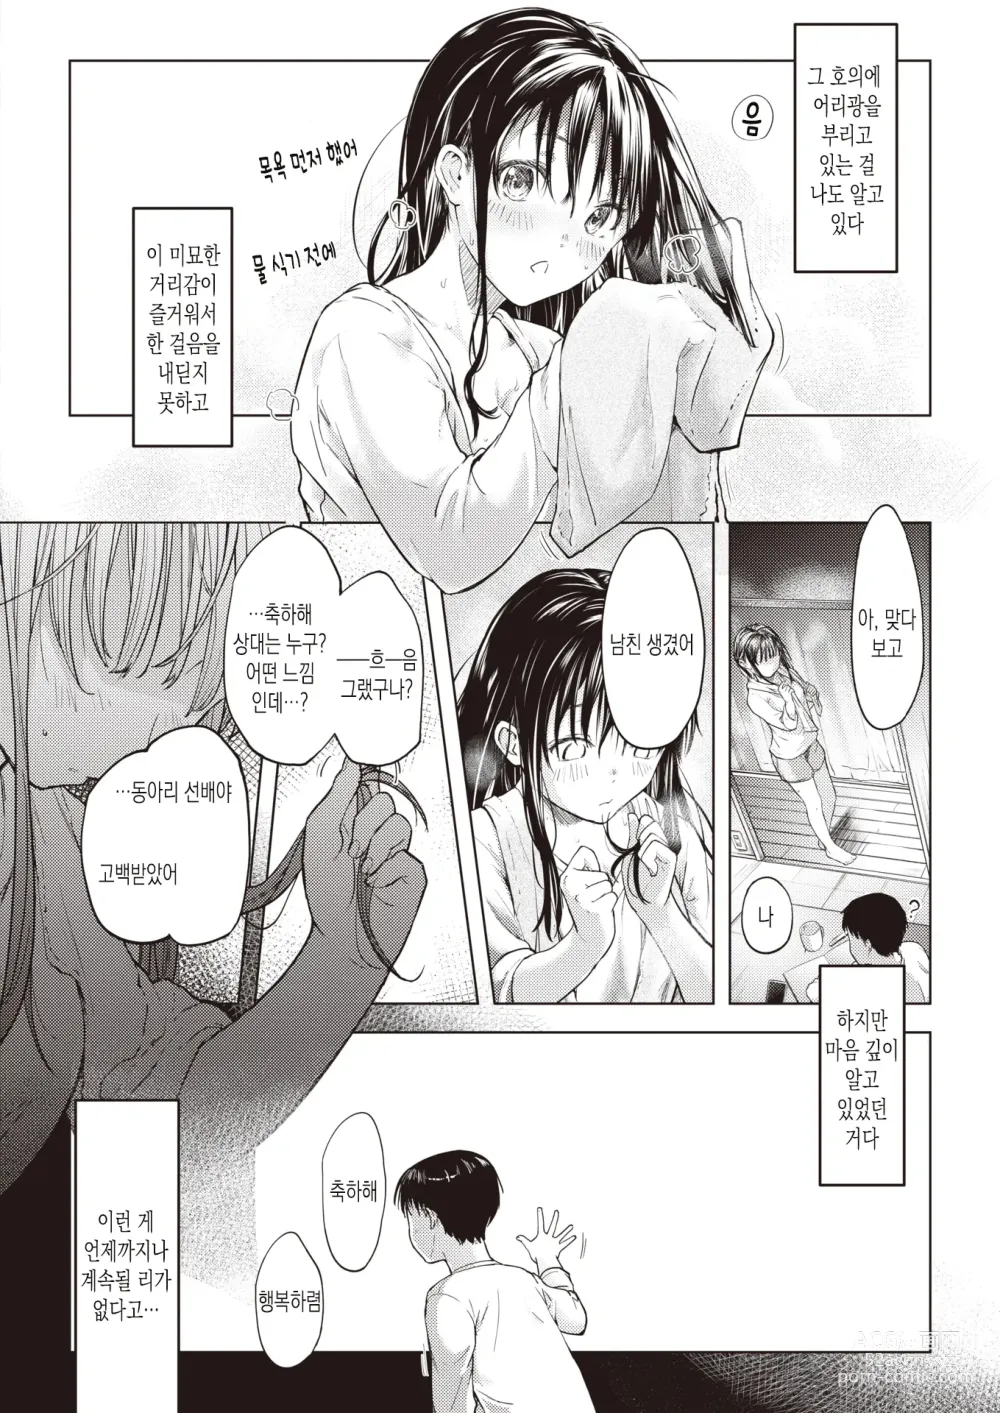 Page 6 of manga 착각누님Connect